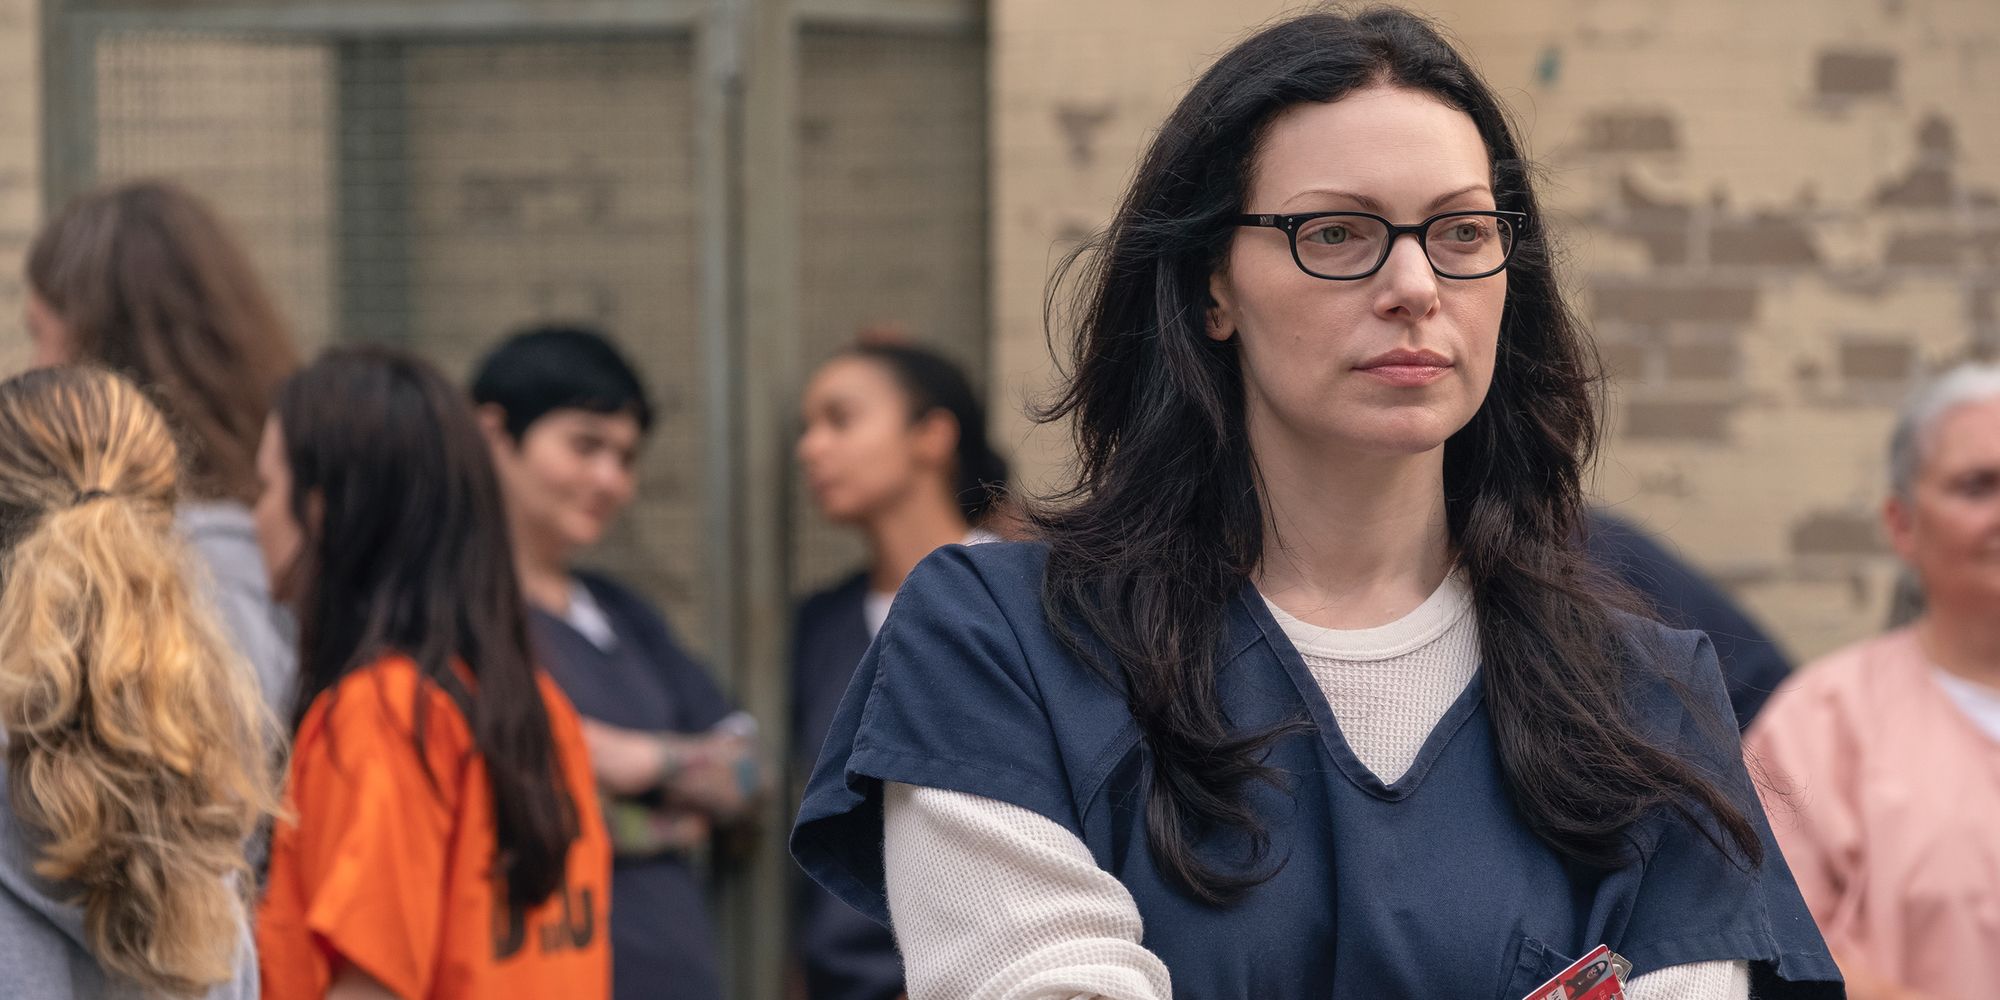 Alex with her arms crossed in OITNB